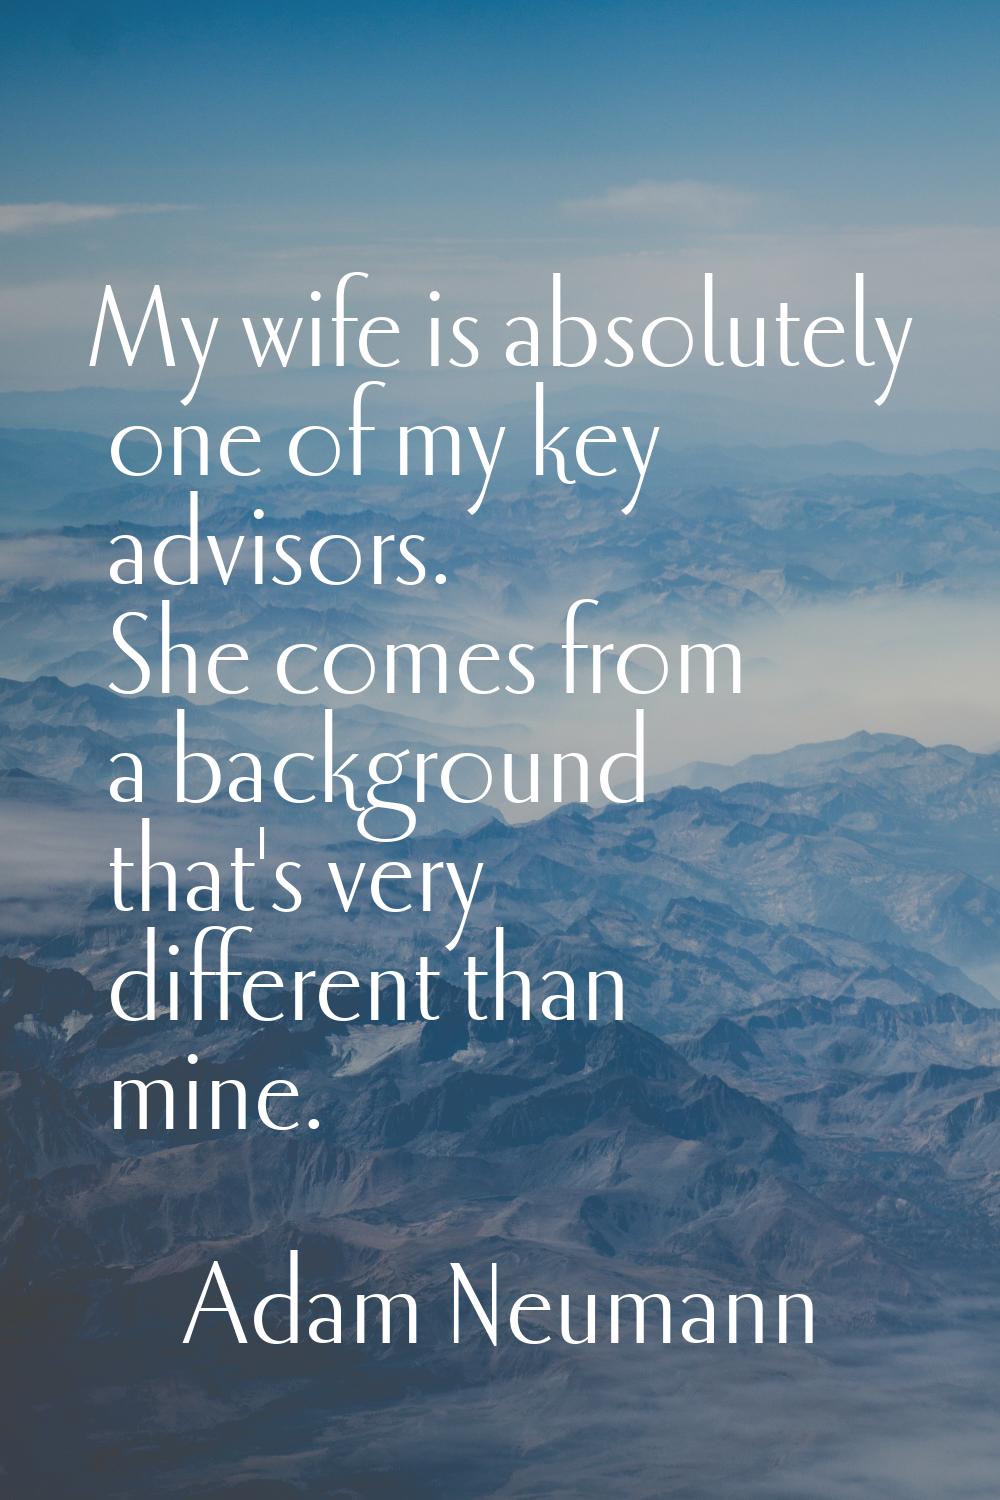 My wife is absolutely one of my key advisors. She comes from a background that's very different tha